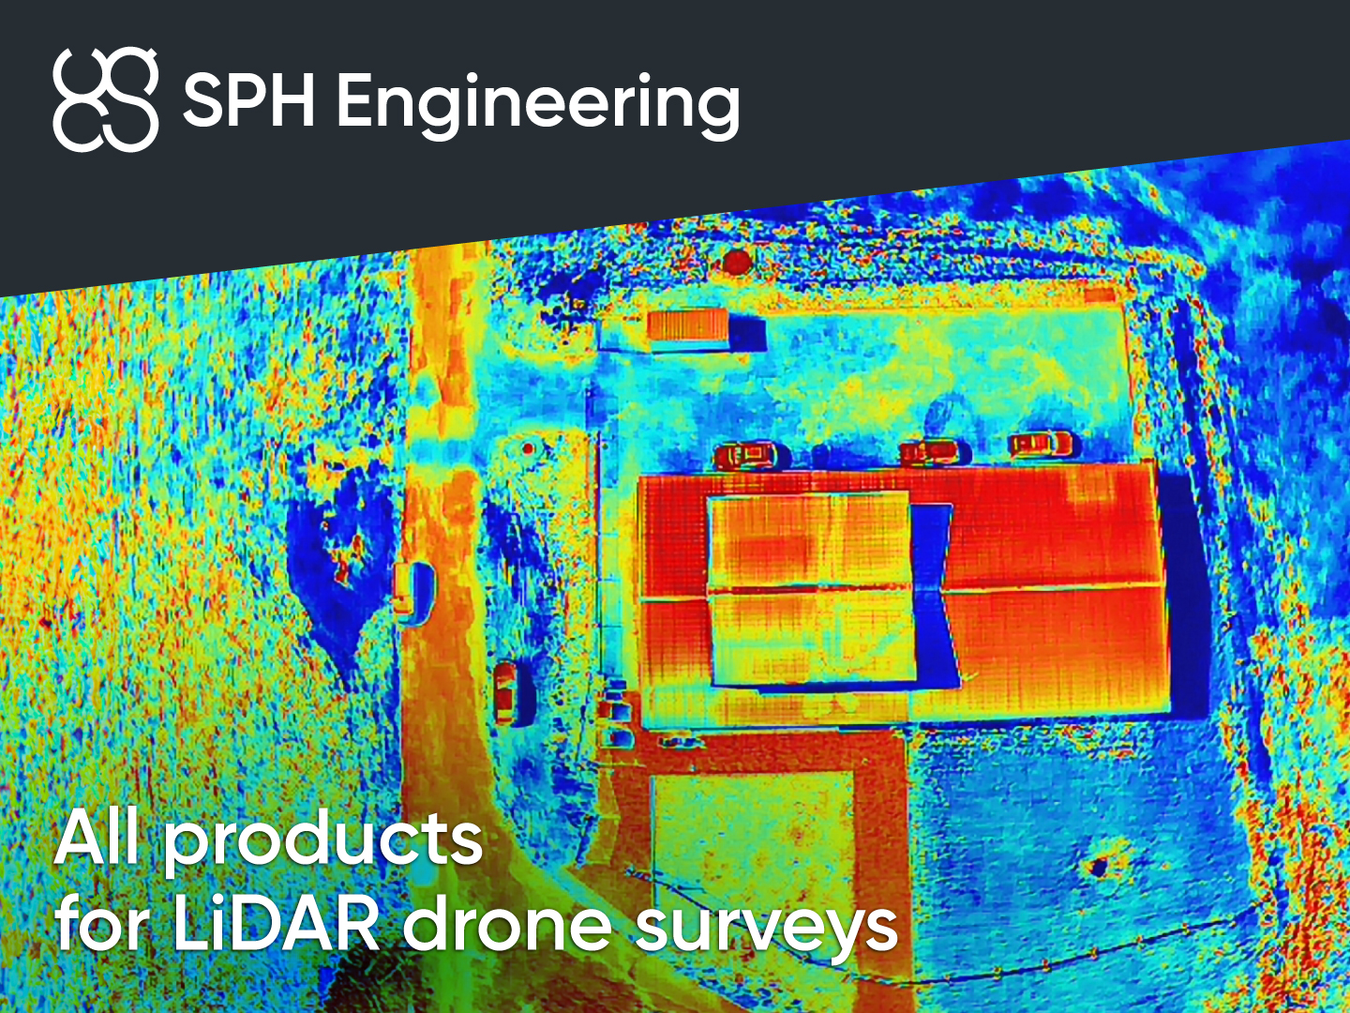 All products for LiDAR surveys